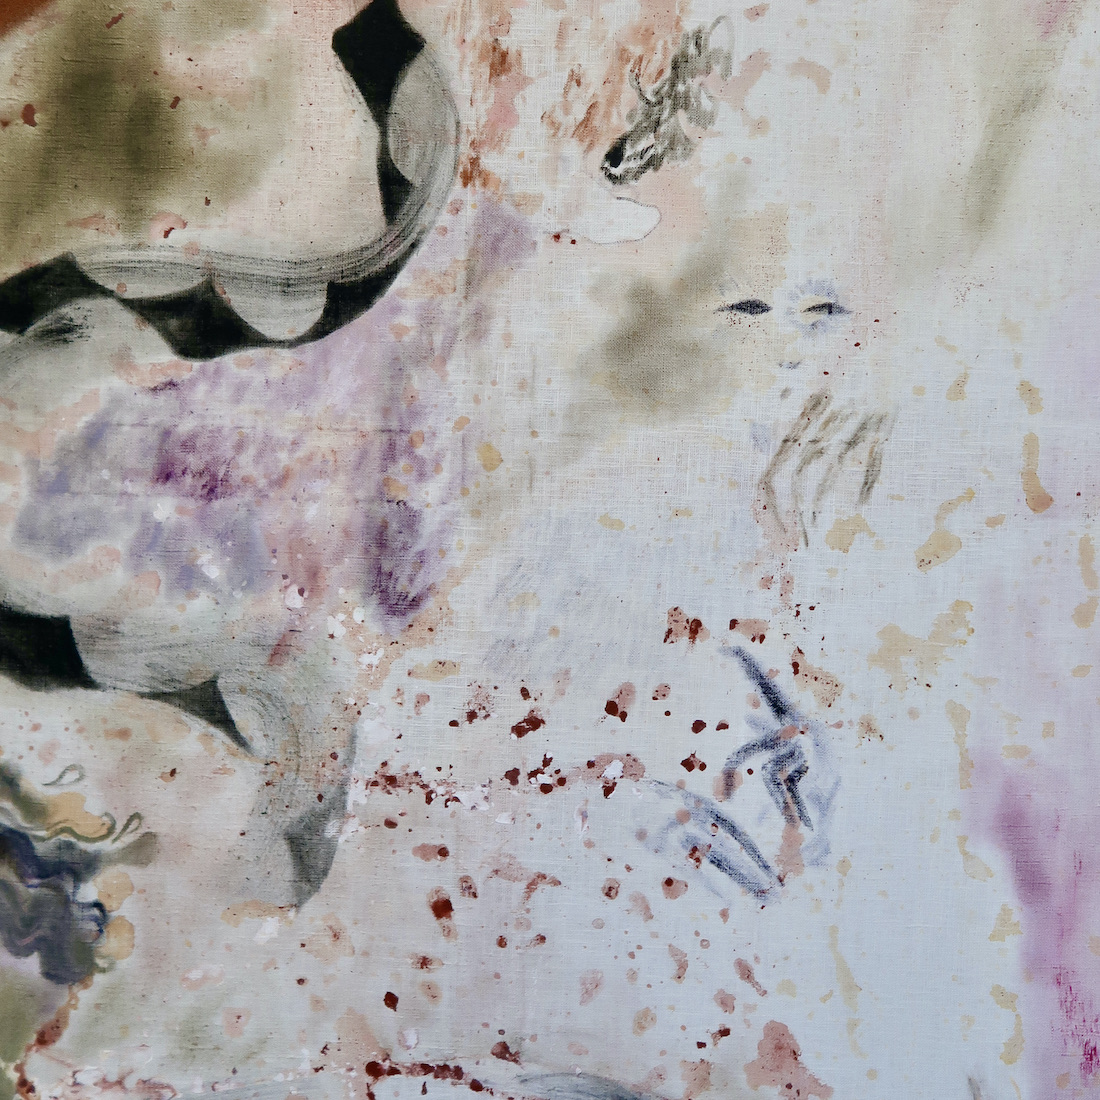 2022_Camille Allen_Virtual_Close up 2 - Spiders Nest, oil and acrylic on linen, 130x200cm